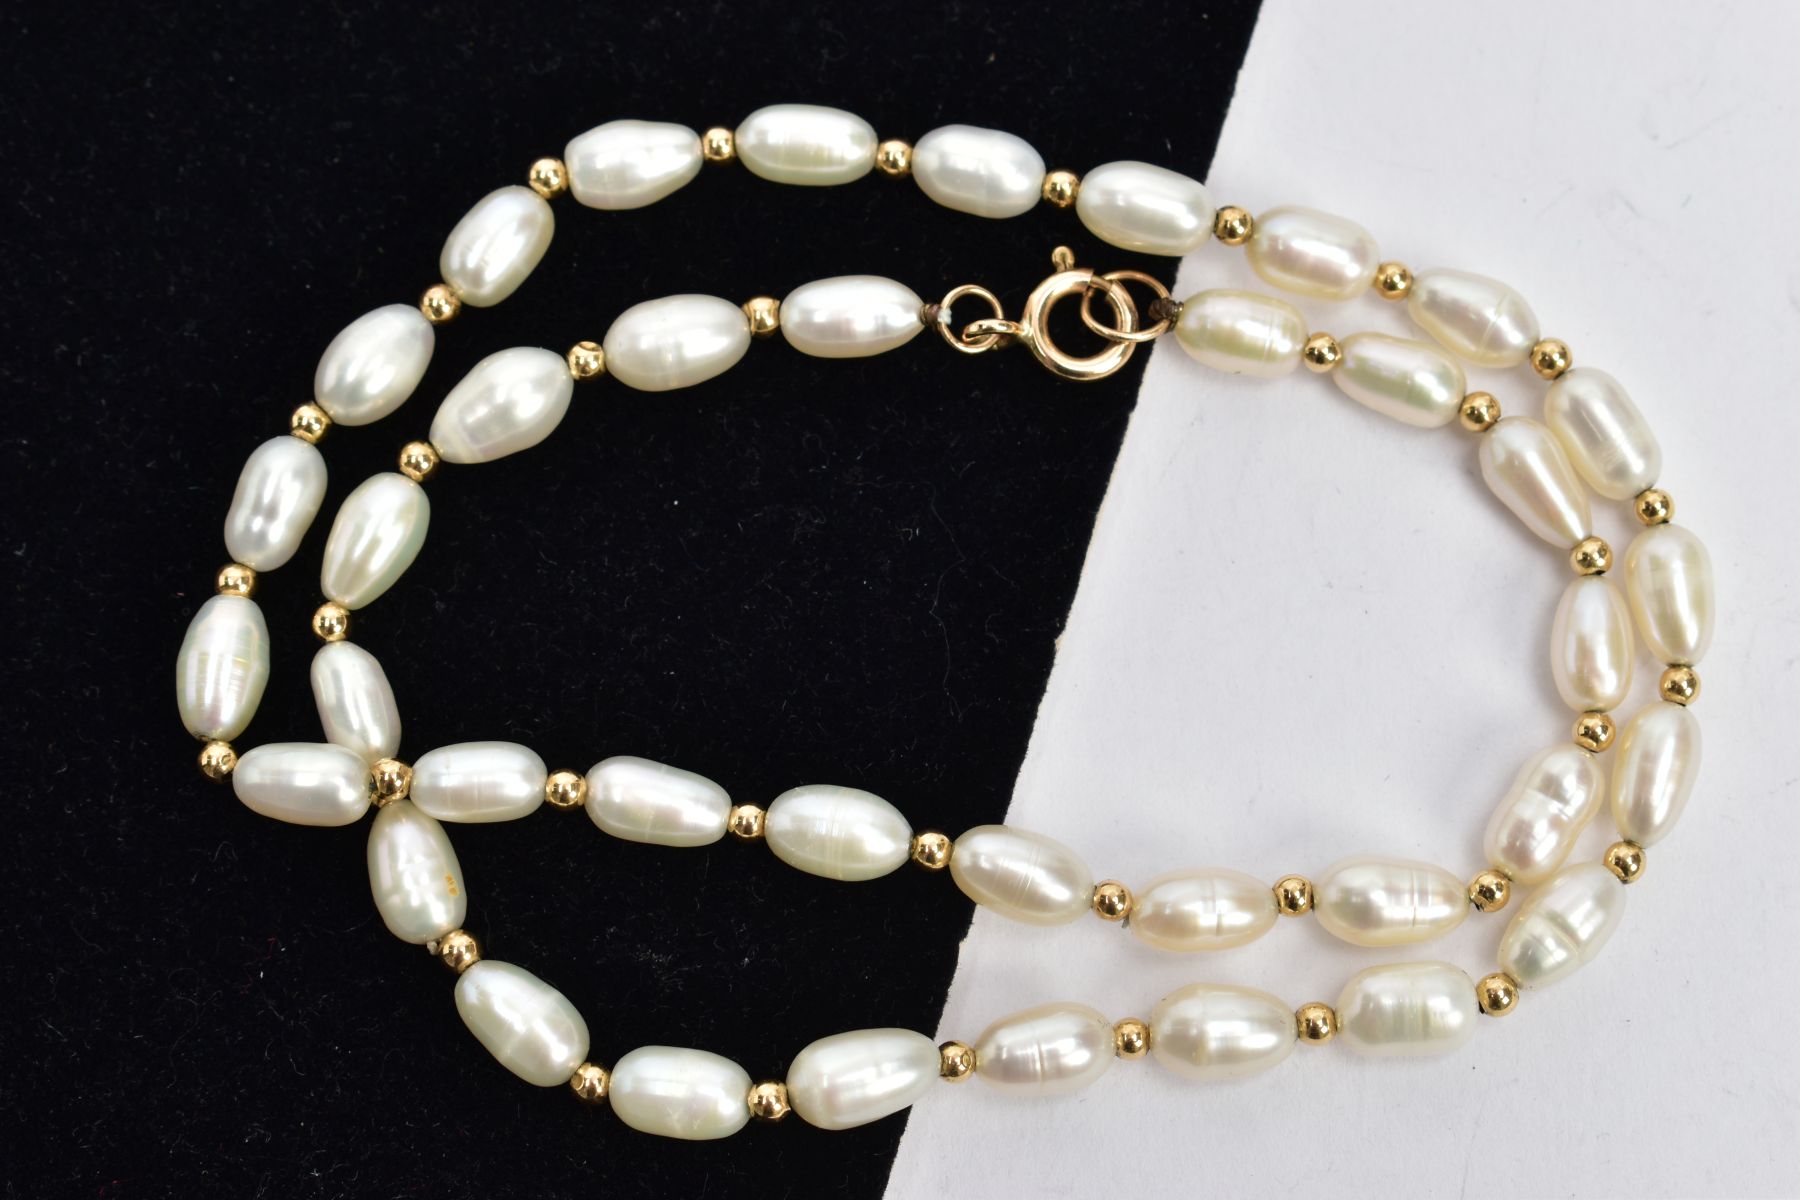 A CULTURED FRESHWATER PEARL NECKLACE, thirty-eight baroque fresh water pearls interspaced between